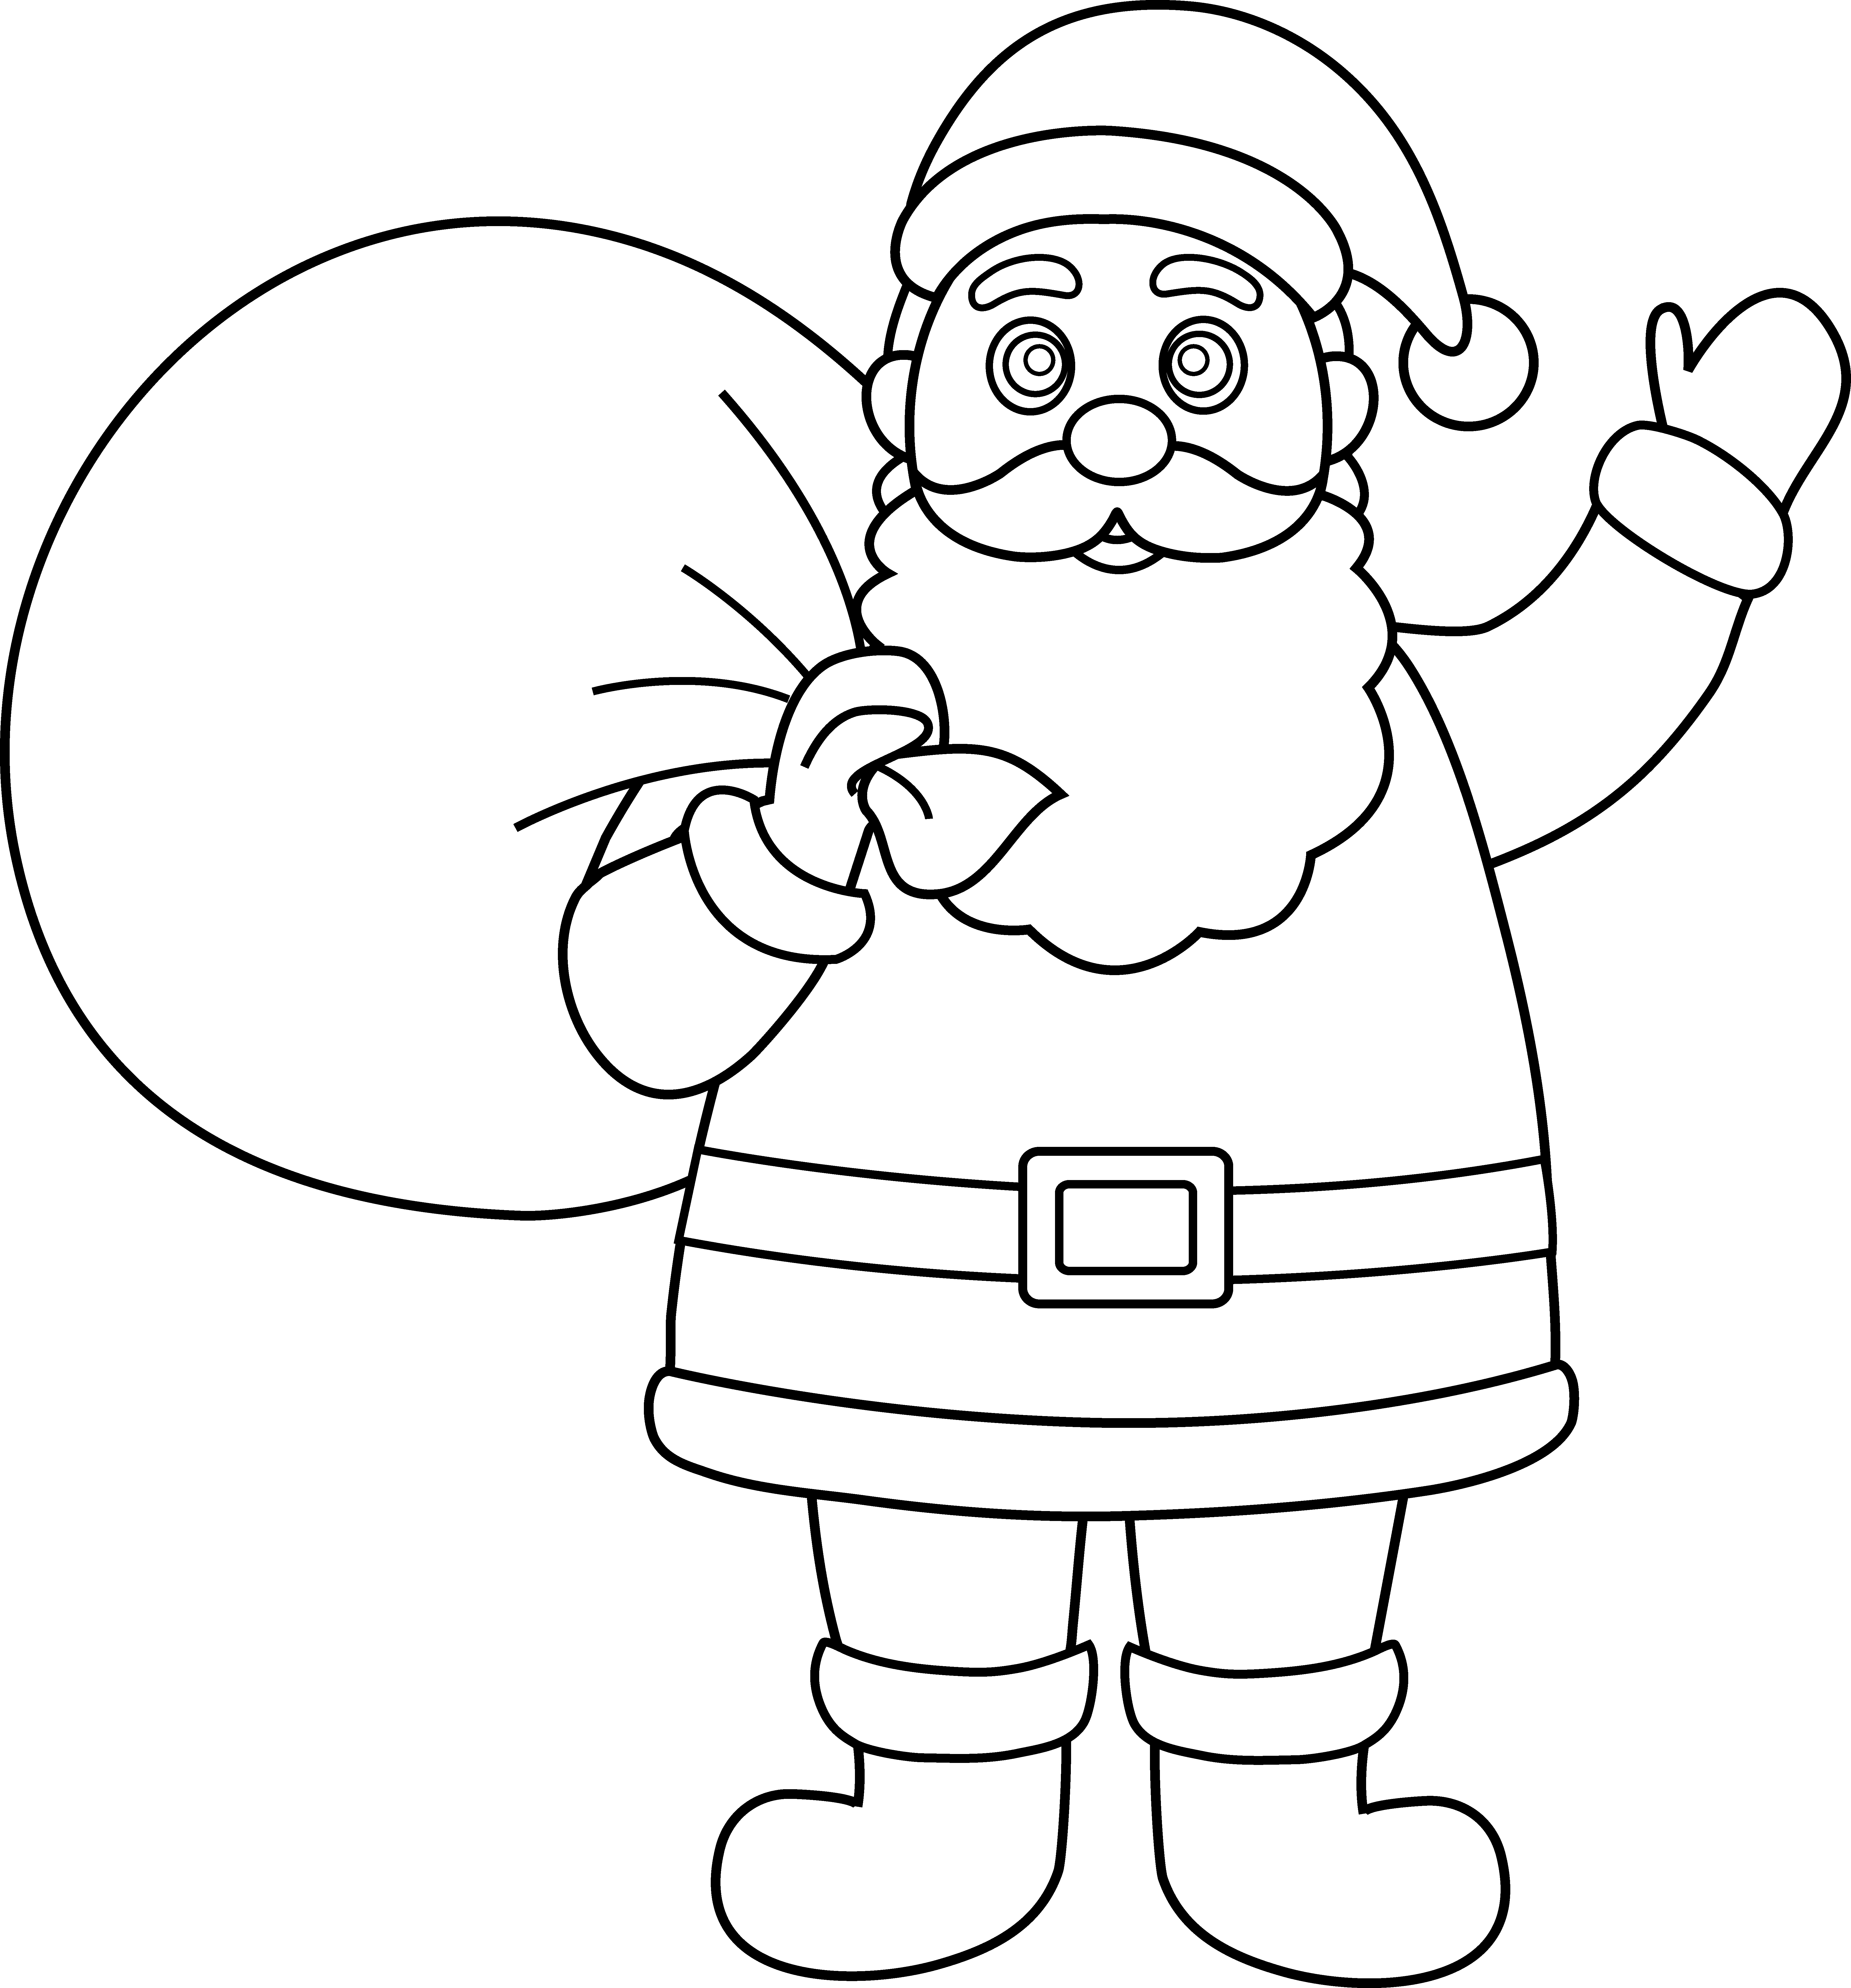 Santa claus with bag of gifts outline Christmas cartoon santa claus with  a bag of gifts black contour on white background  CanStock